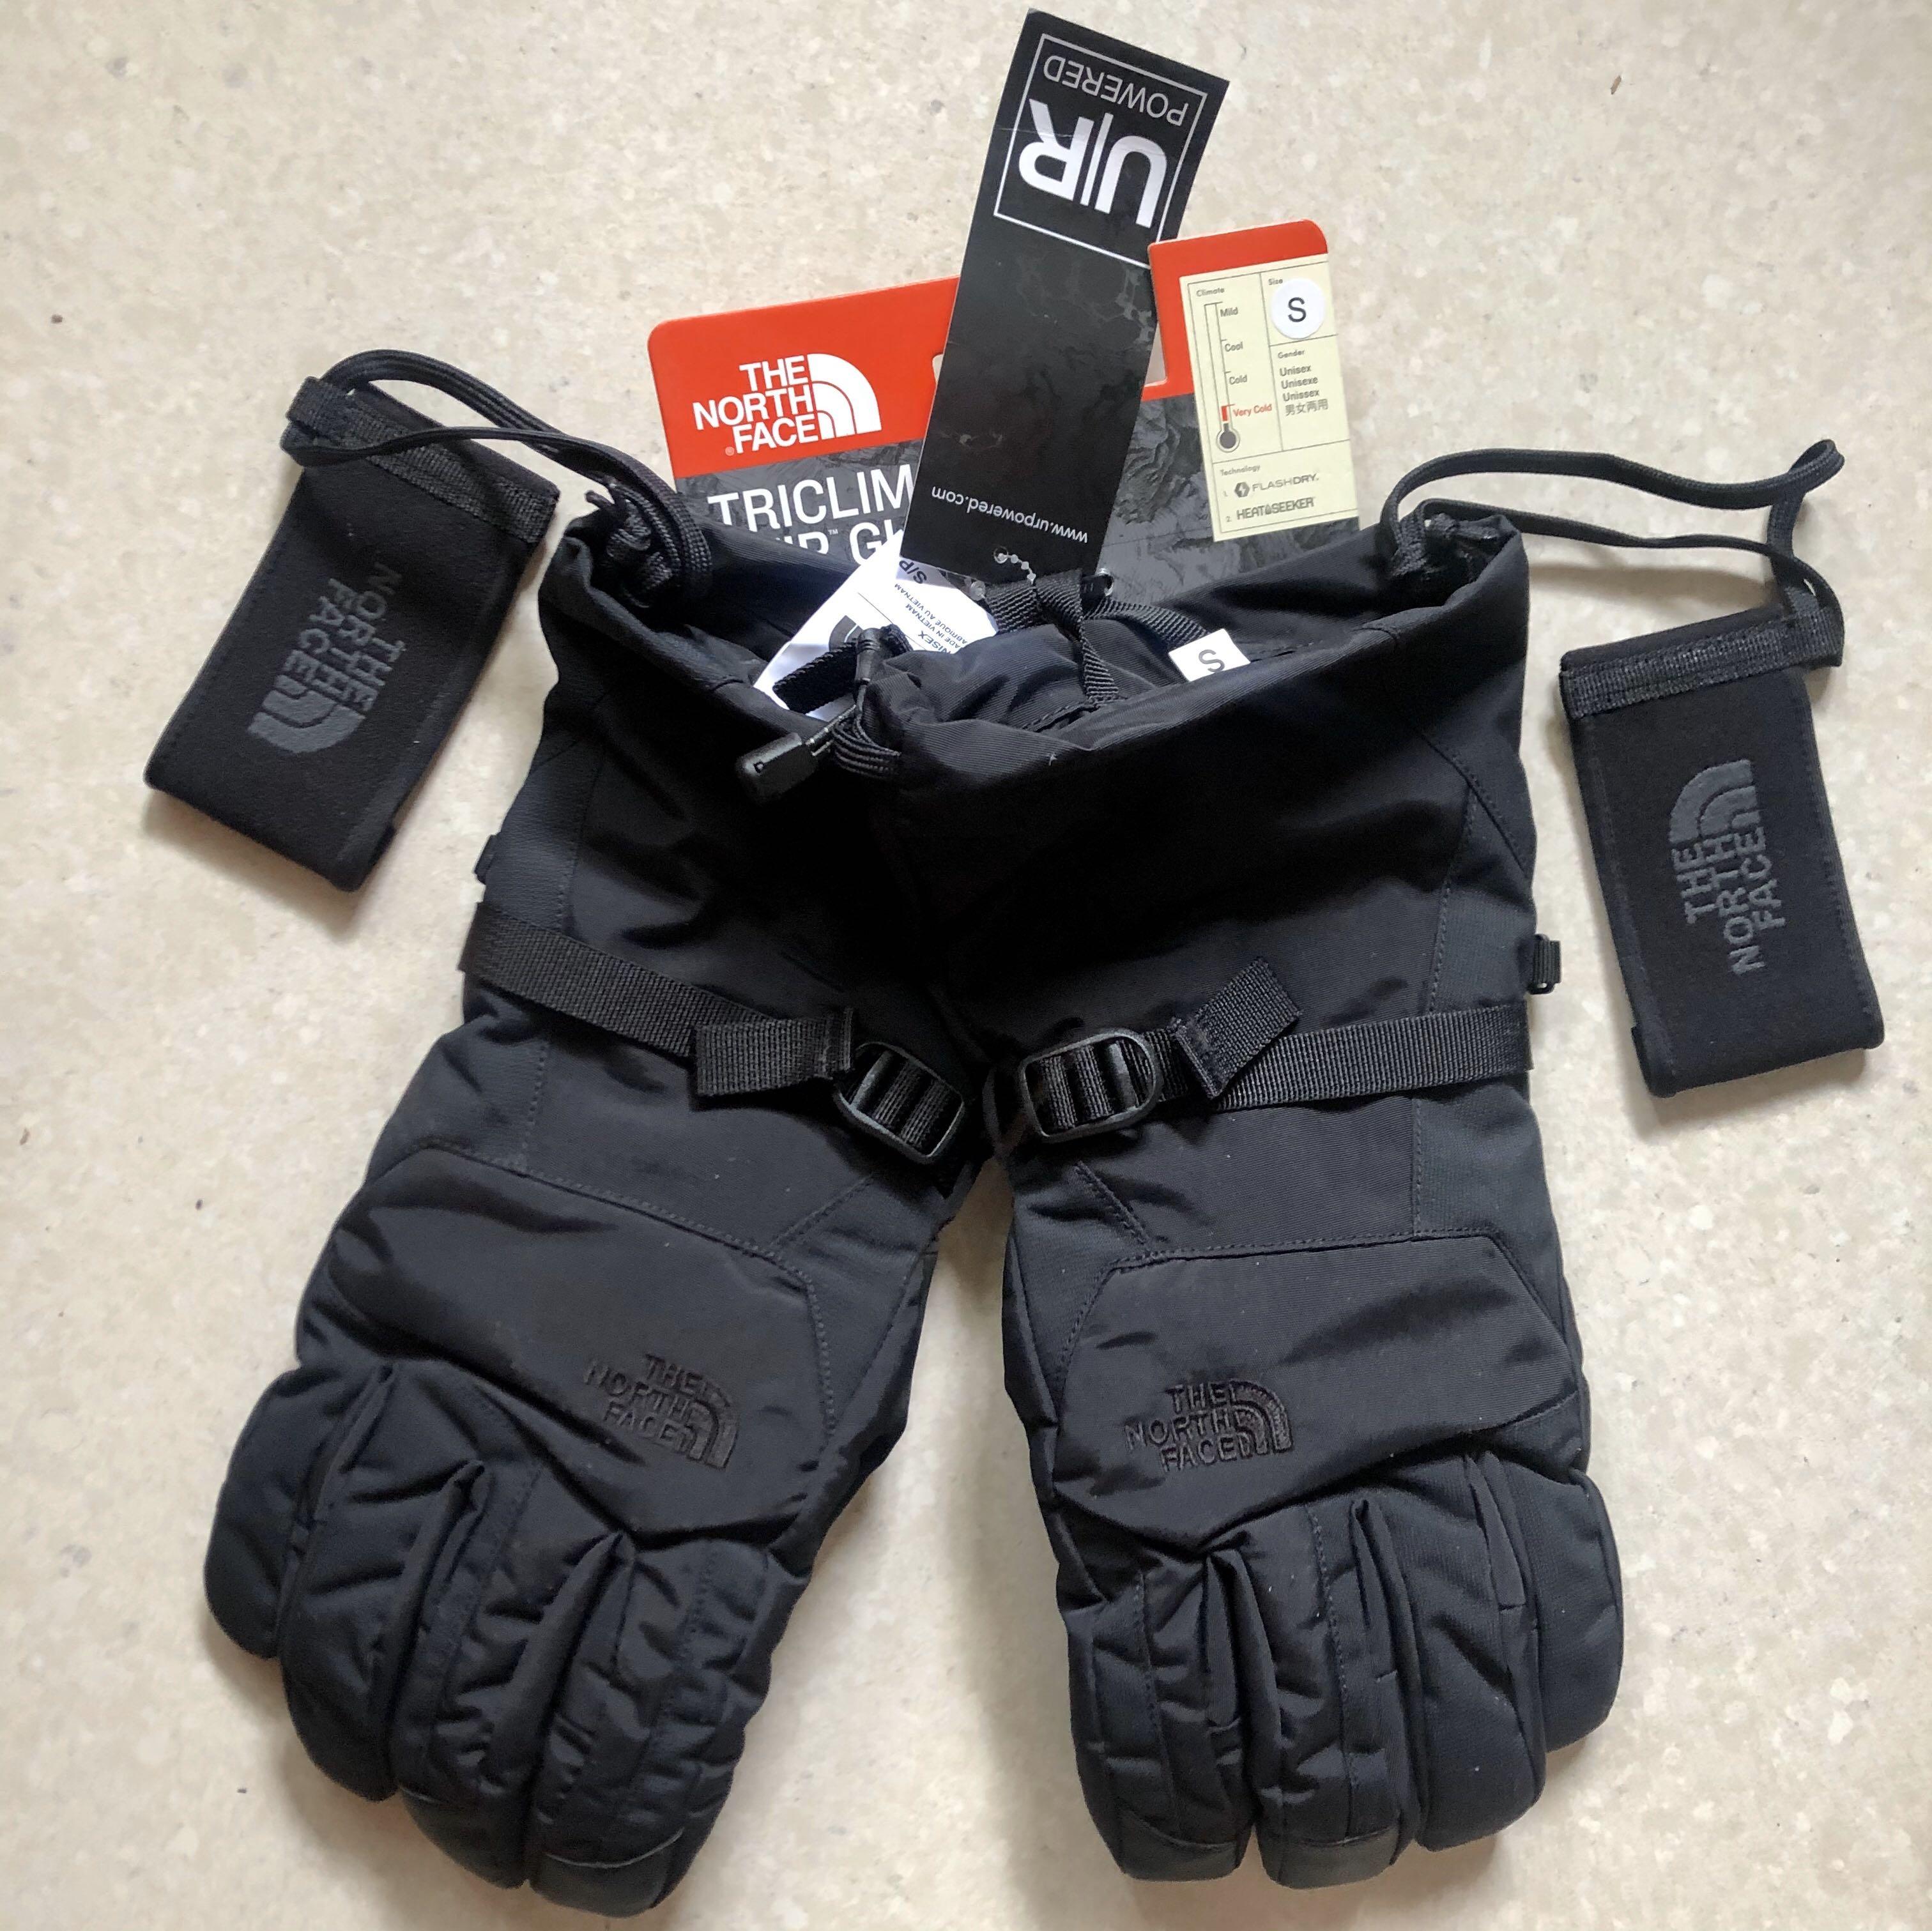 The North Face FlashDry Liner Glove